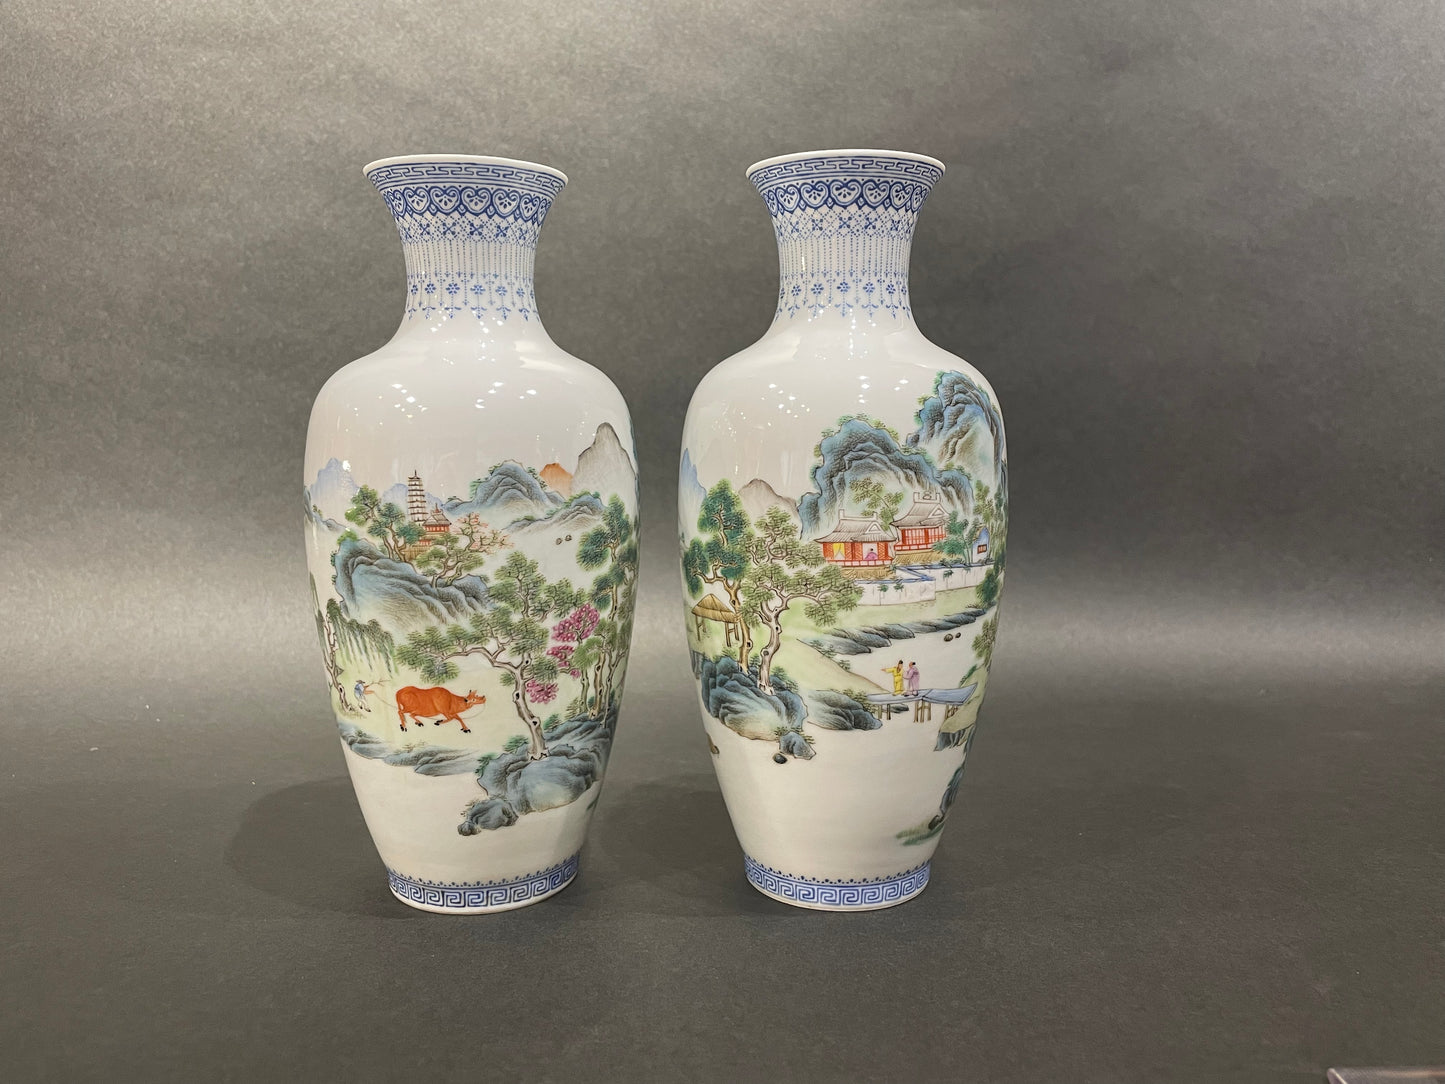 A Pair of Famille Rose Landscape Vases, Republic of China